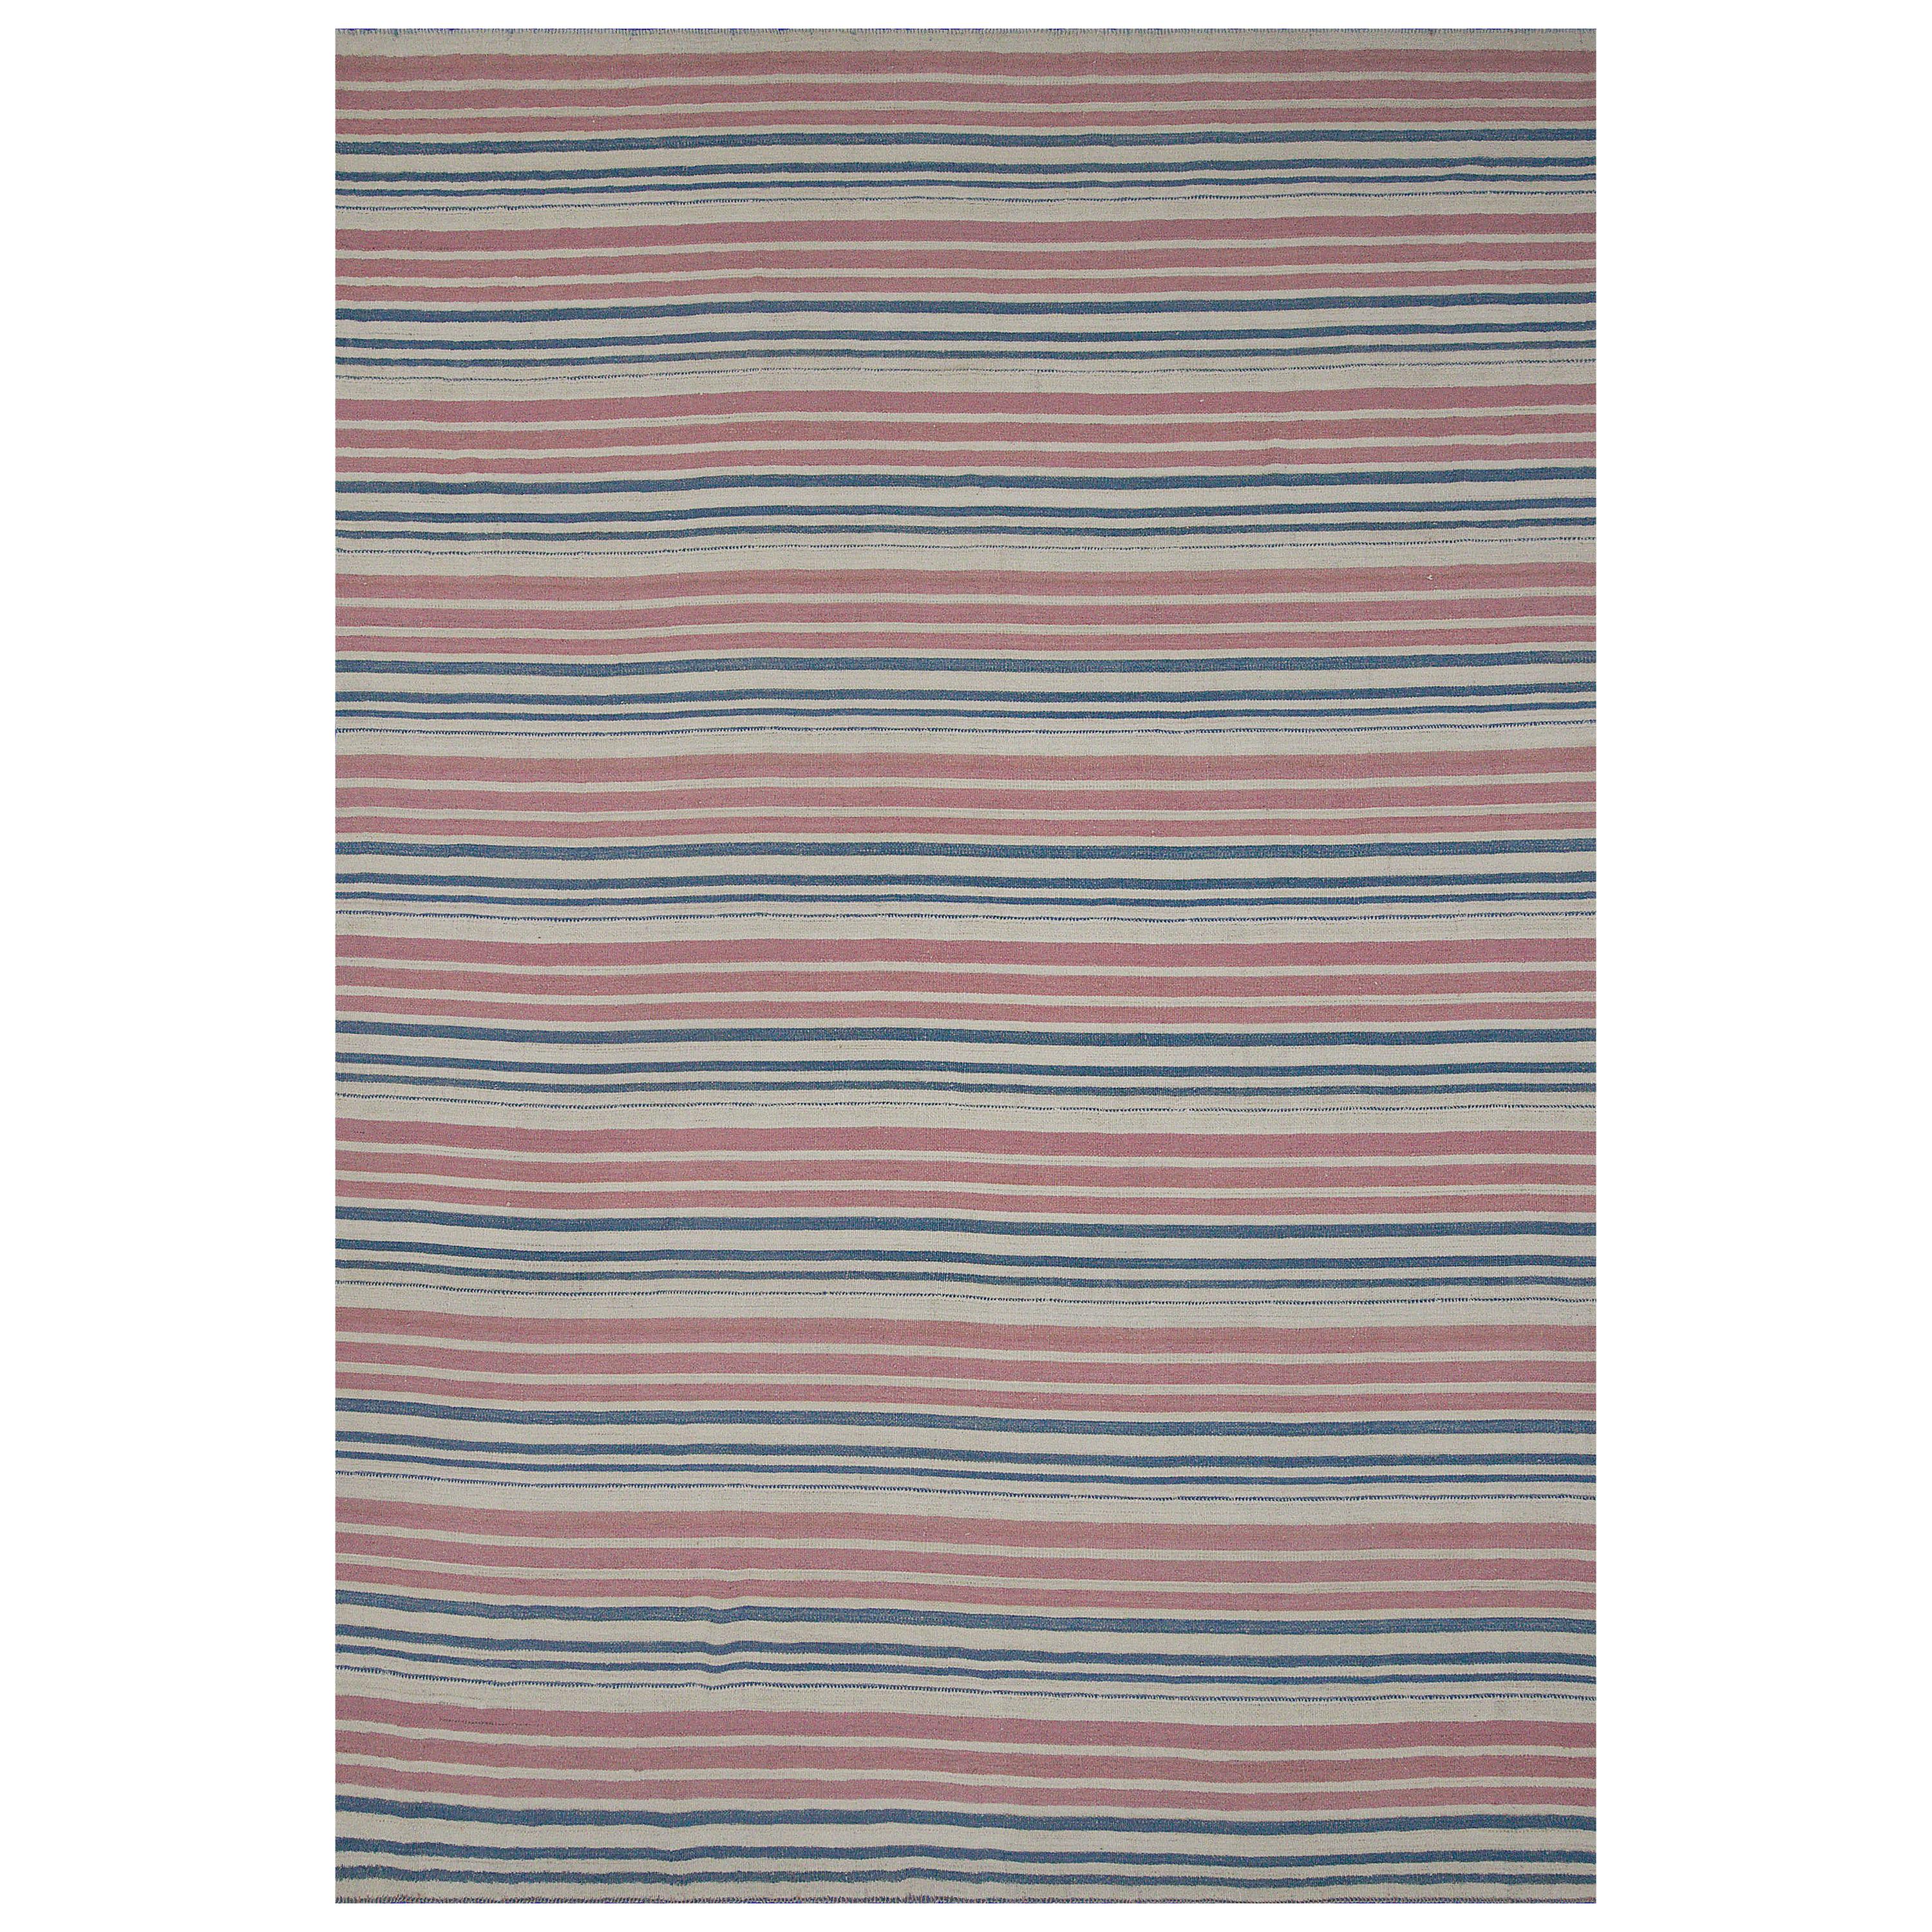 Modern Kilim Persian Rug in Blue and Pink Stripes on Ivory Field